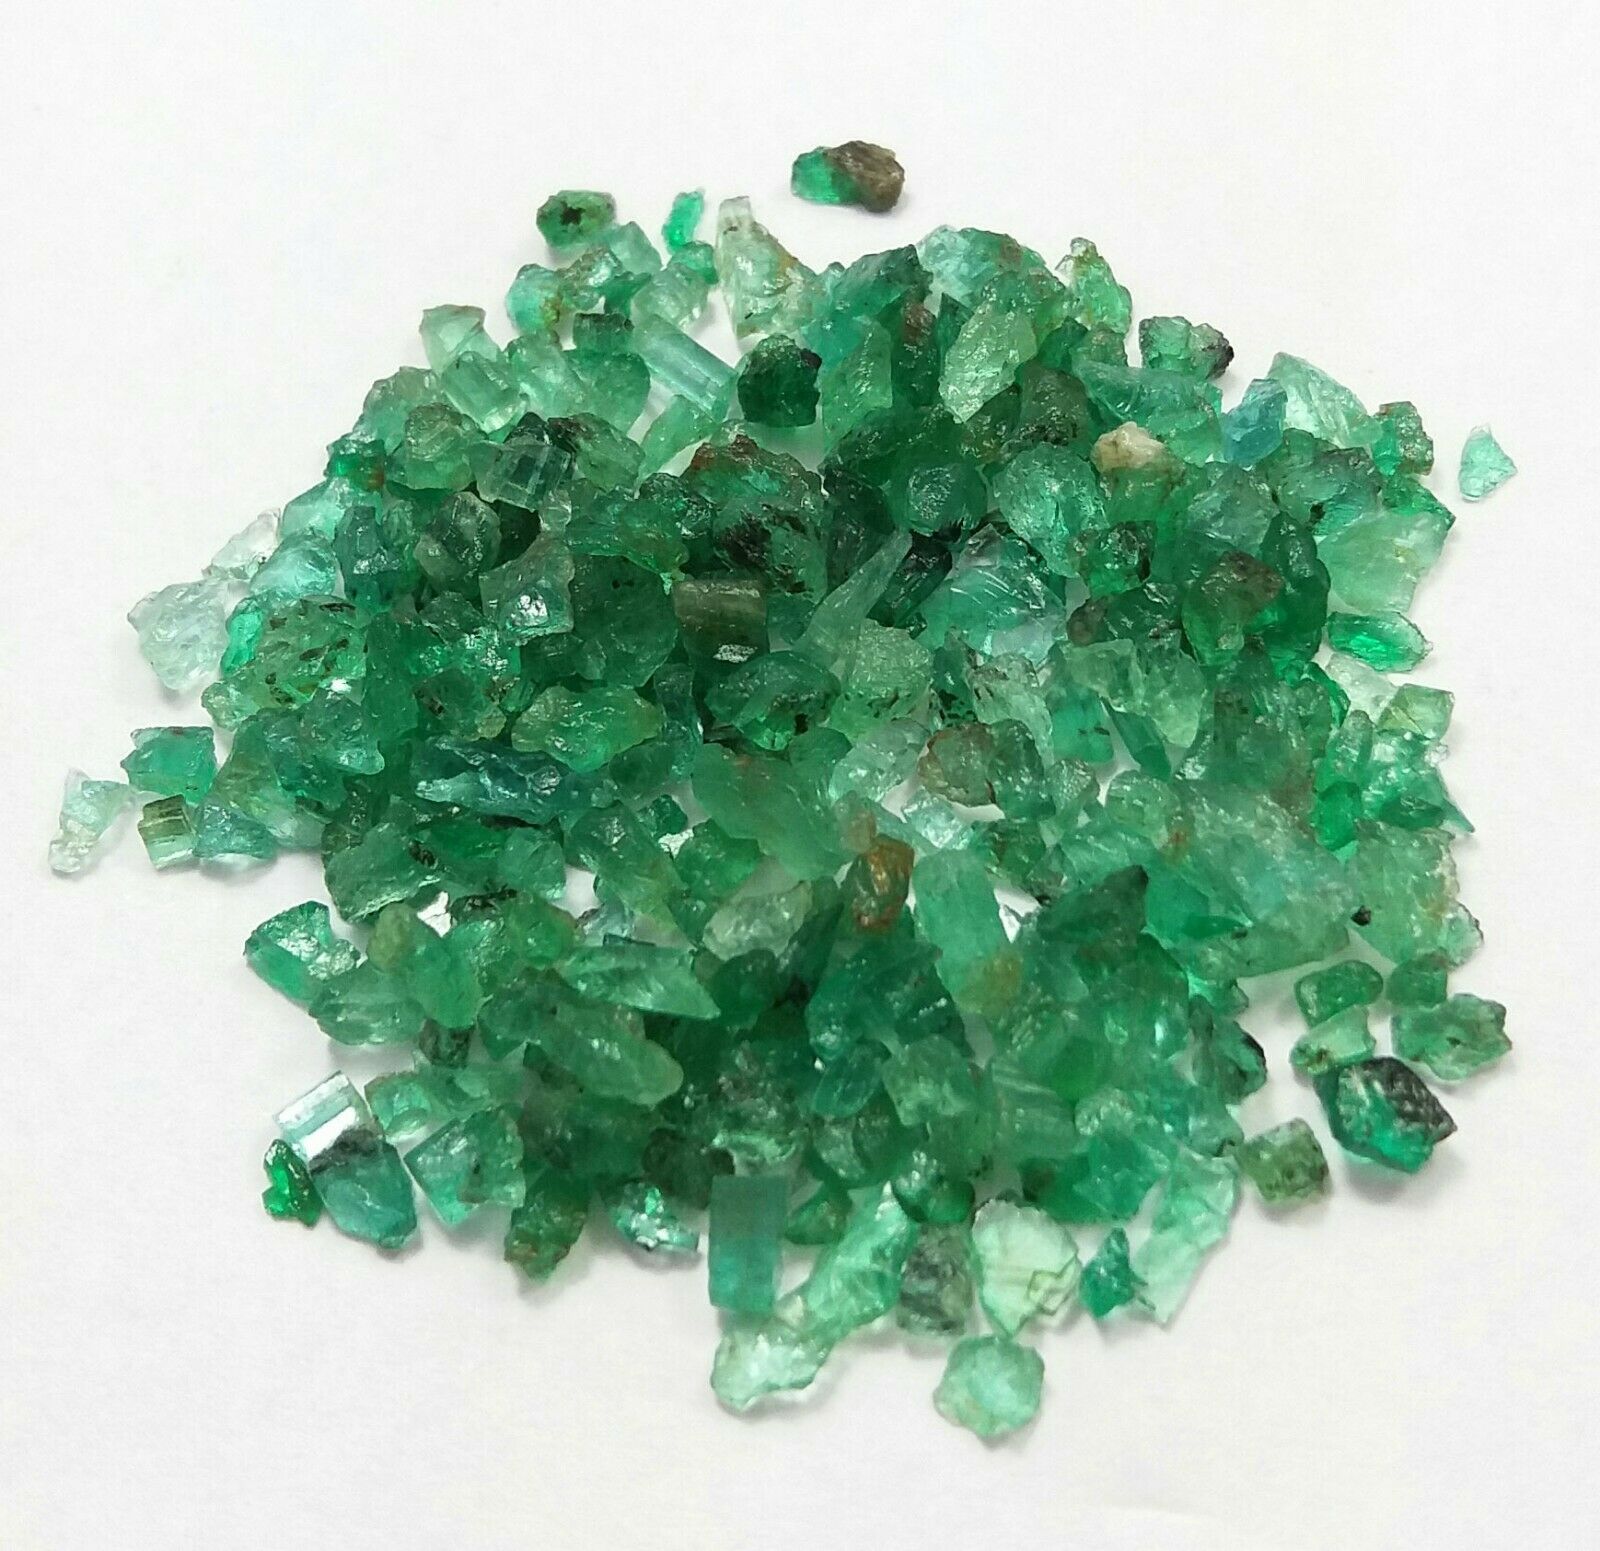 50 Ct Natural Emerald Rough Top Rich Green Zambia Transparent Lot Top Quality